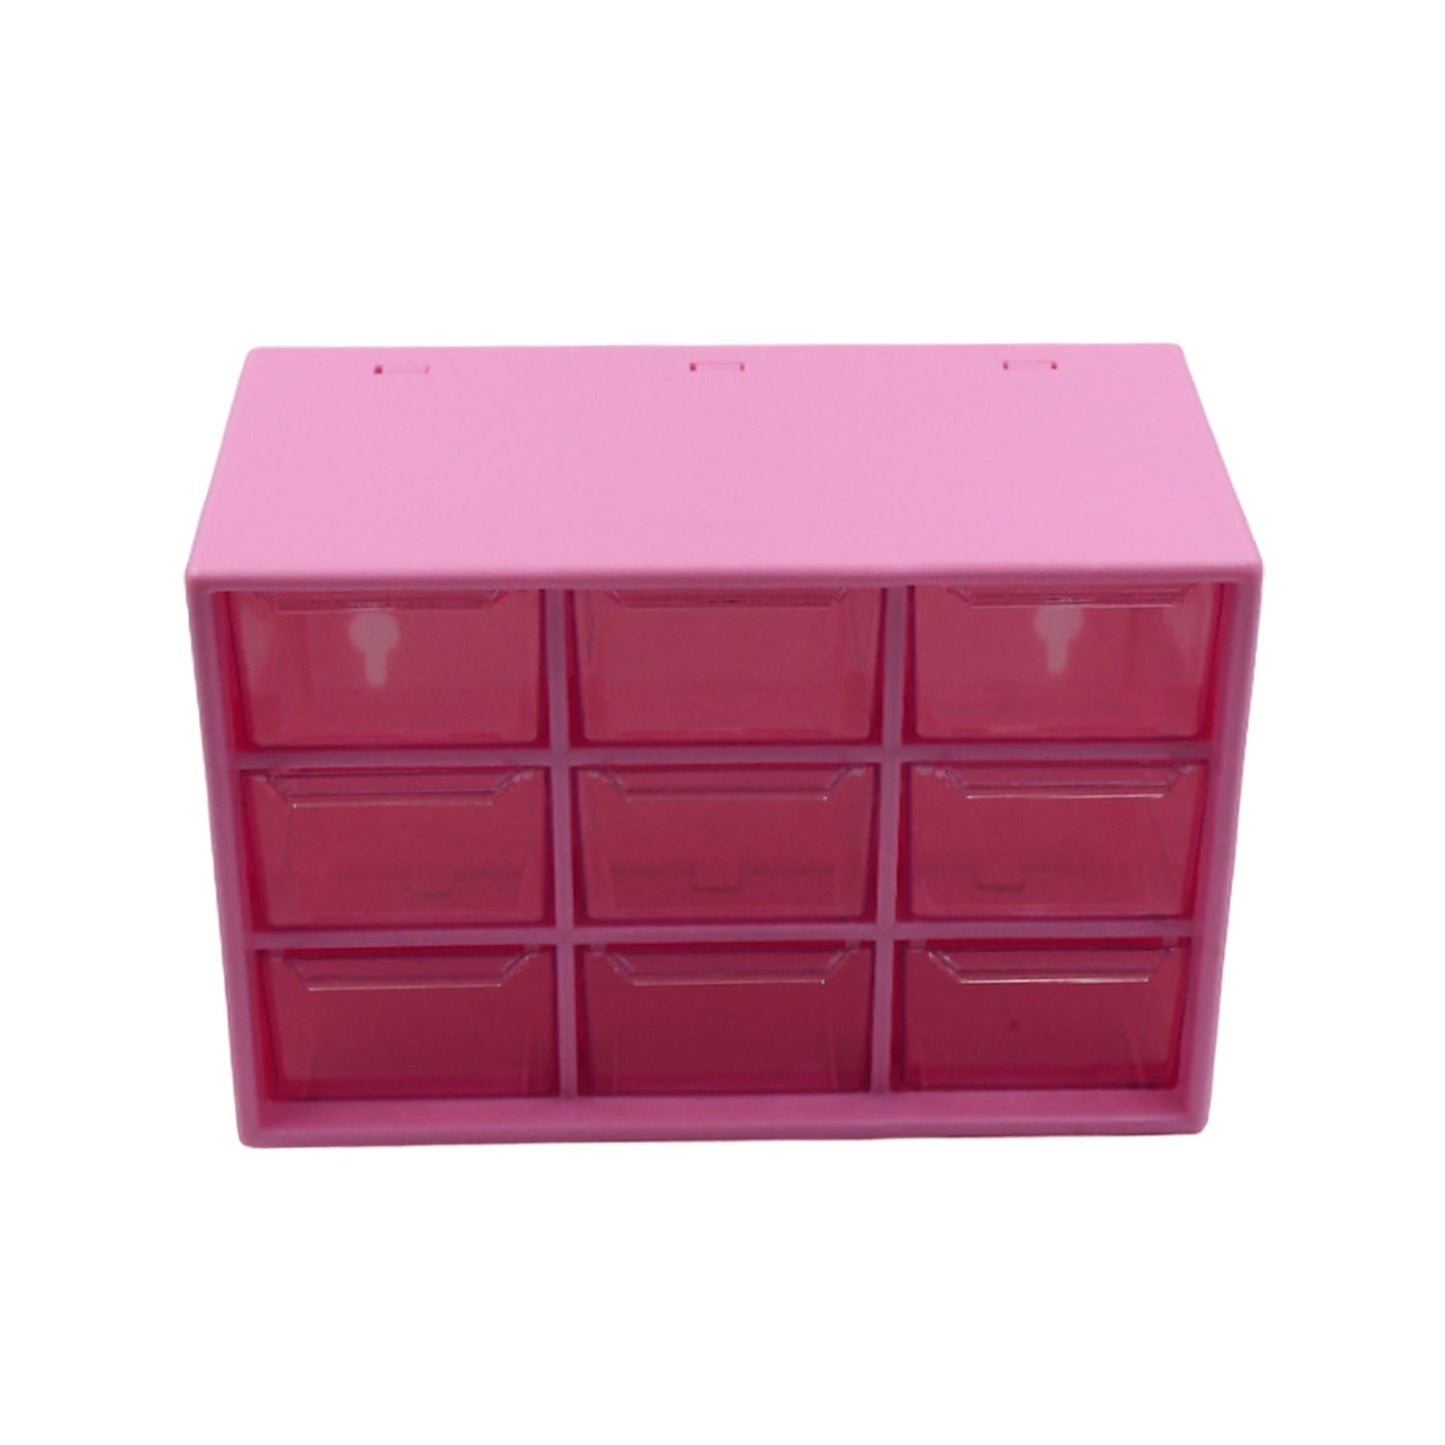 Storage Box 9 Grids Multi-purpose Durable Desktop Drawer Organizer for Pencils Storage Holder Hanging Hole Design for Small Items